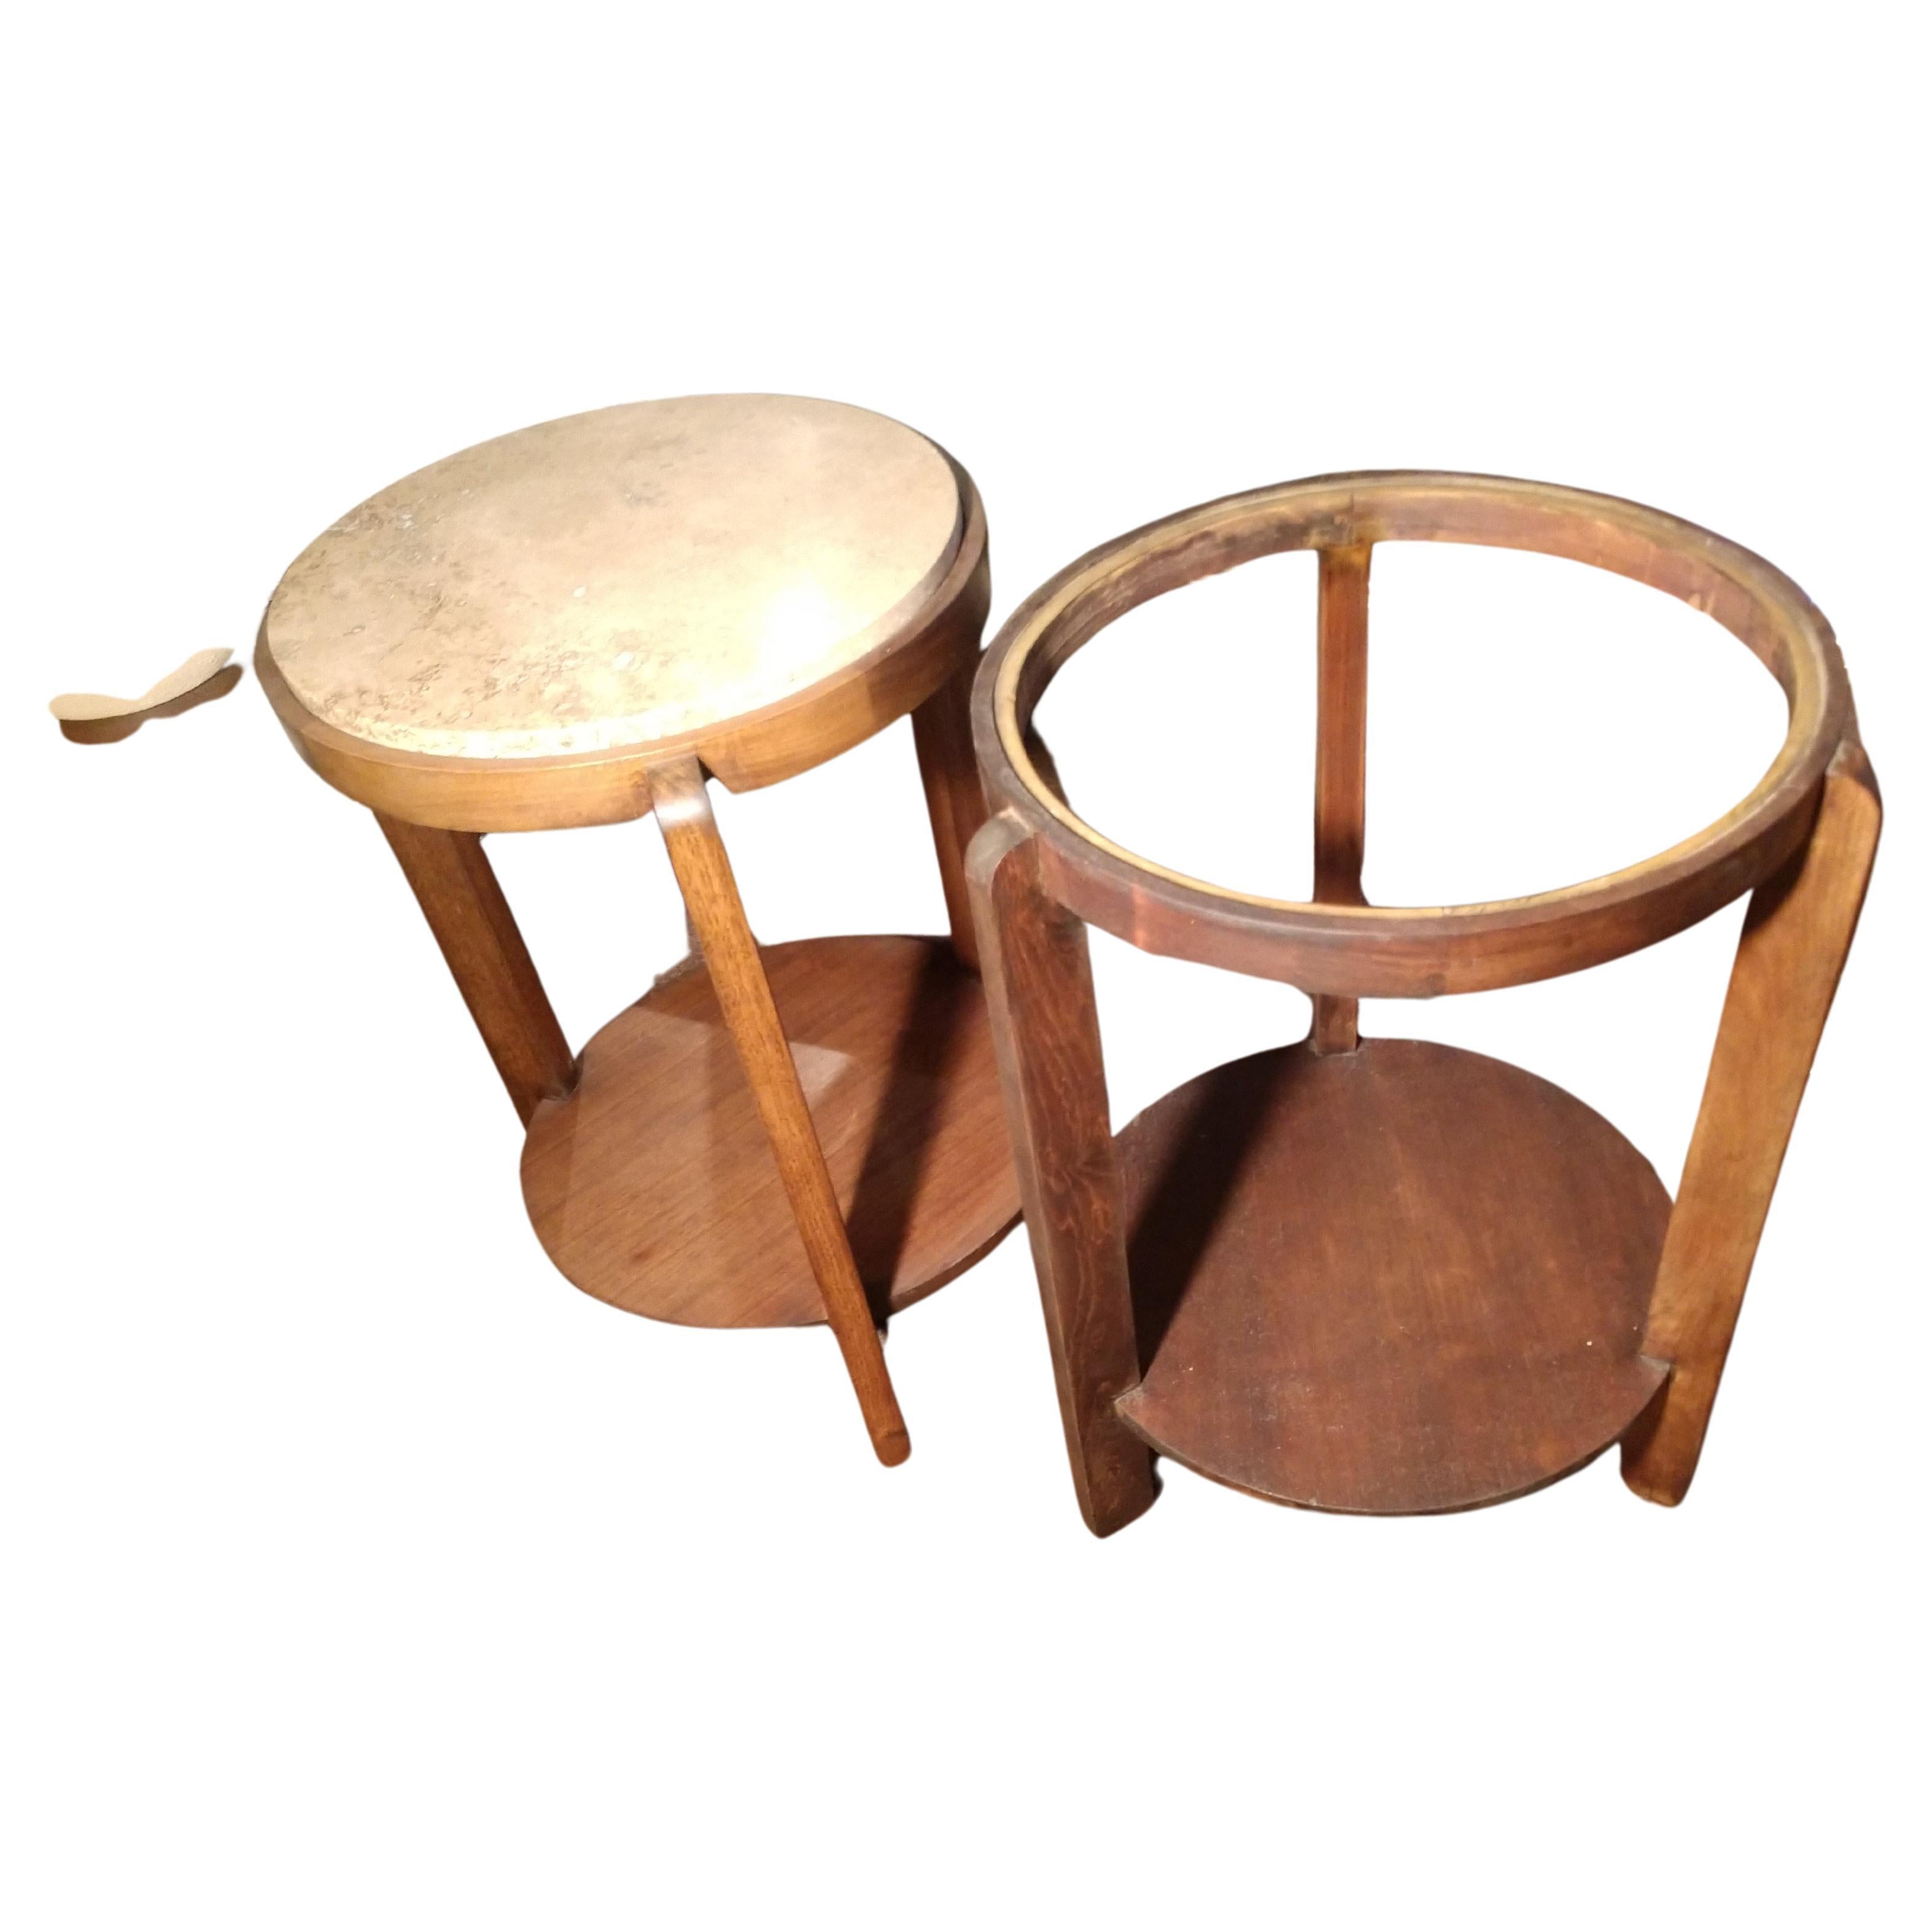 American Pair of  Art Deco Mid-Century Modern Travertine & Walnut Gueridon End Tables For Sale